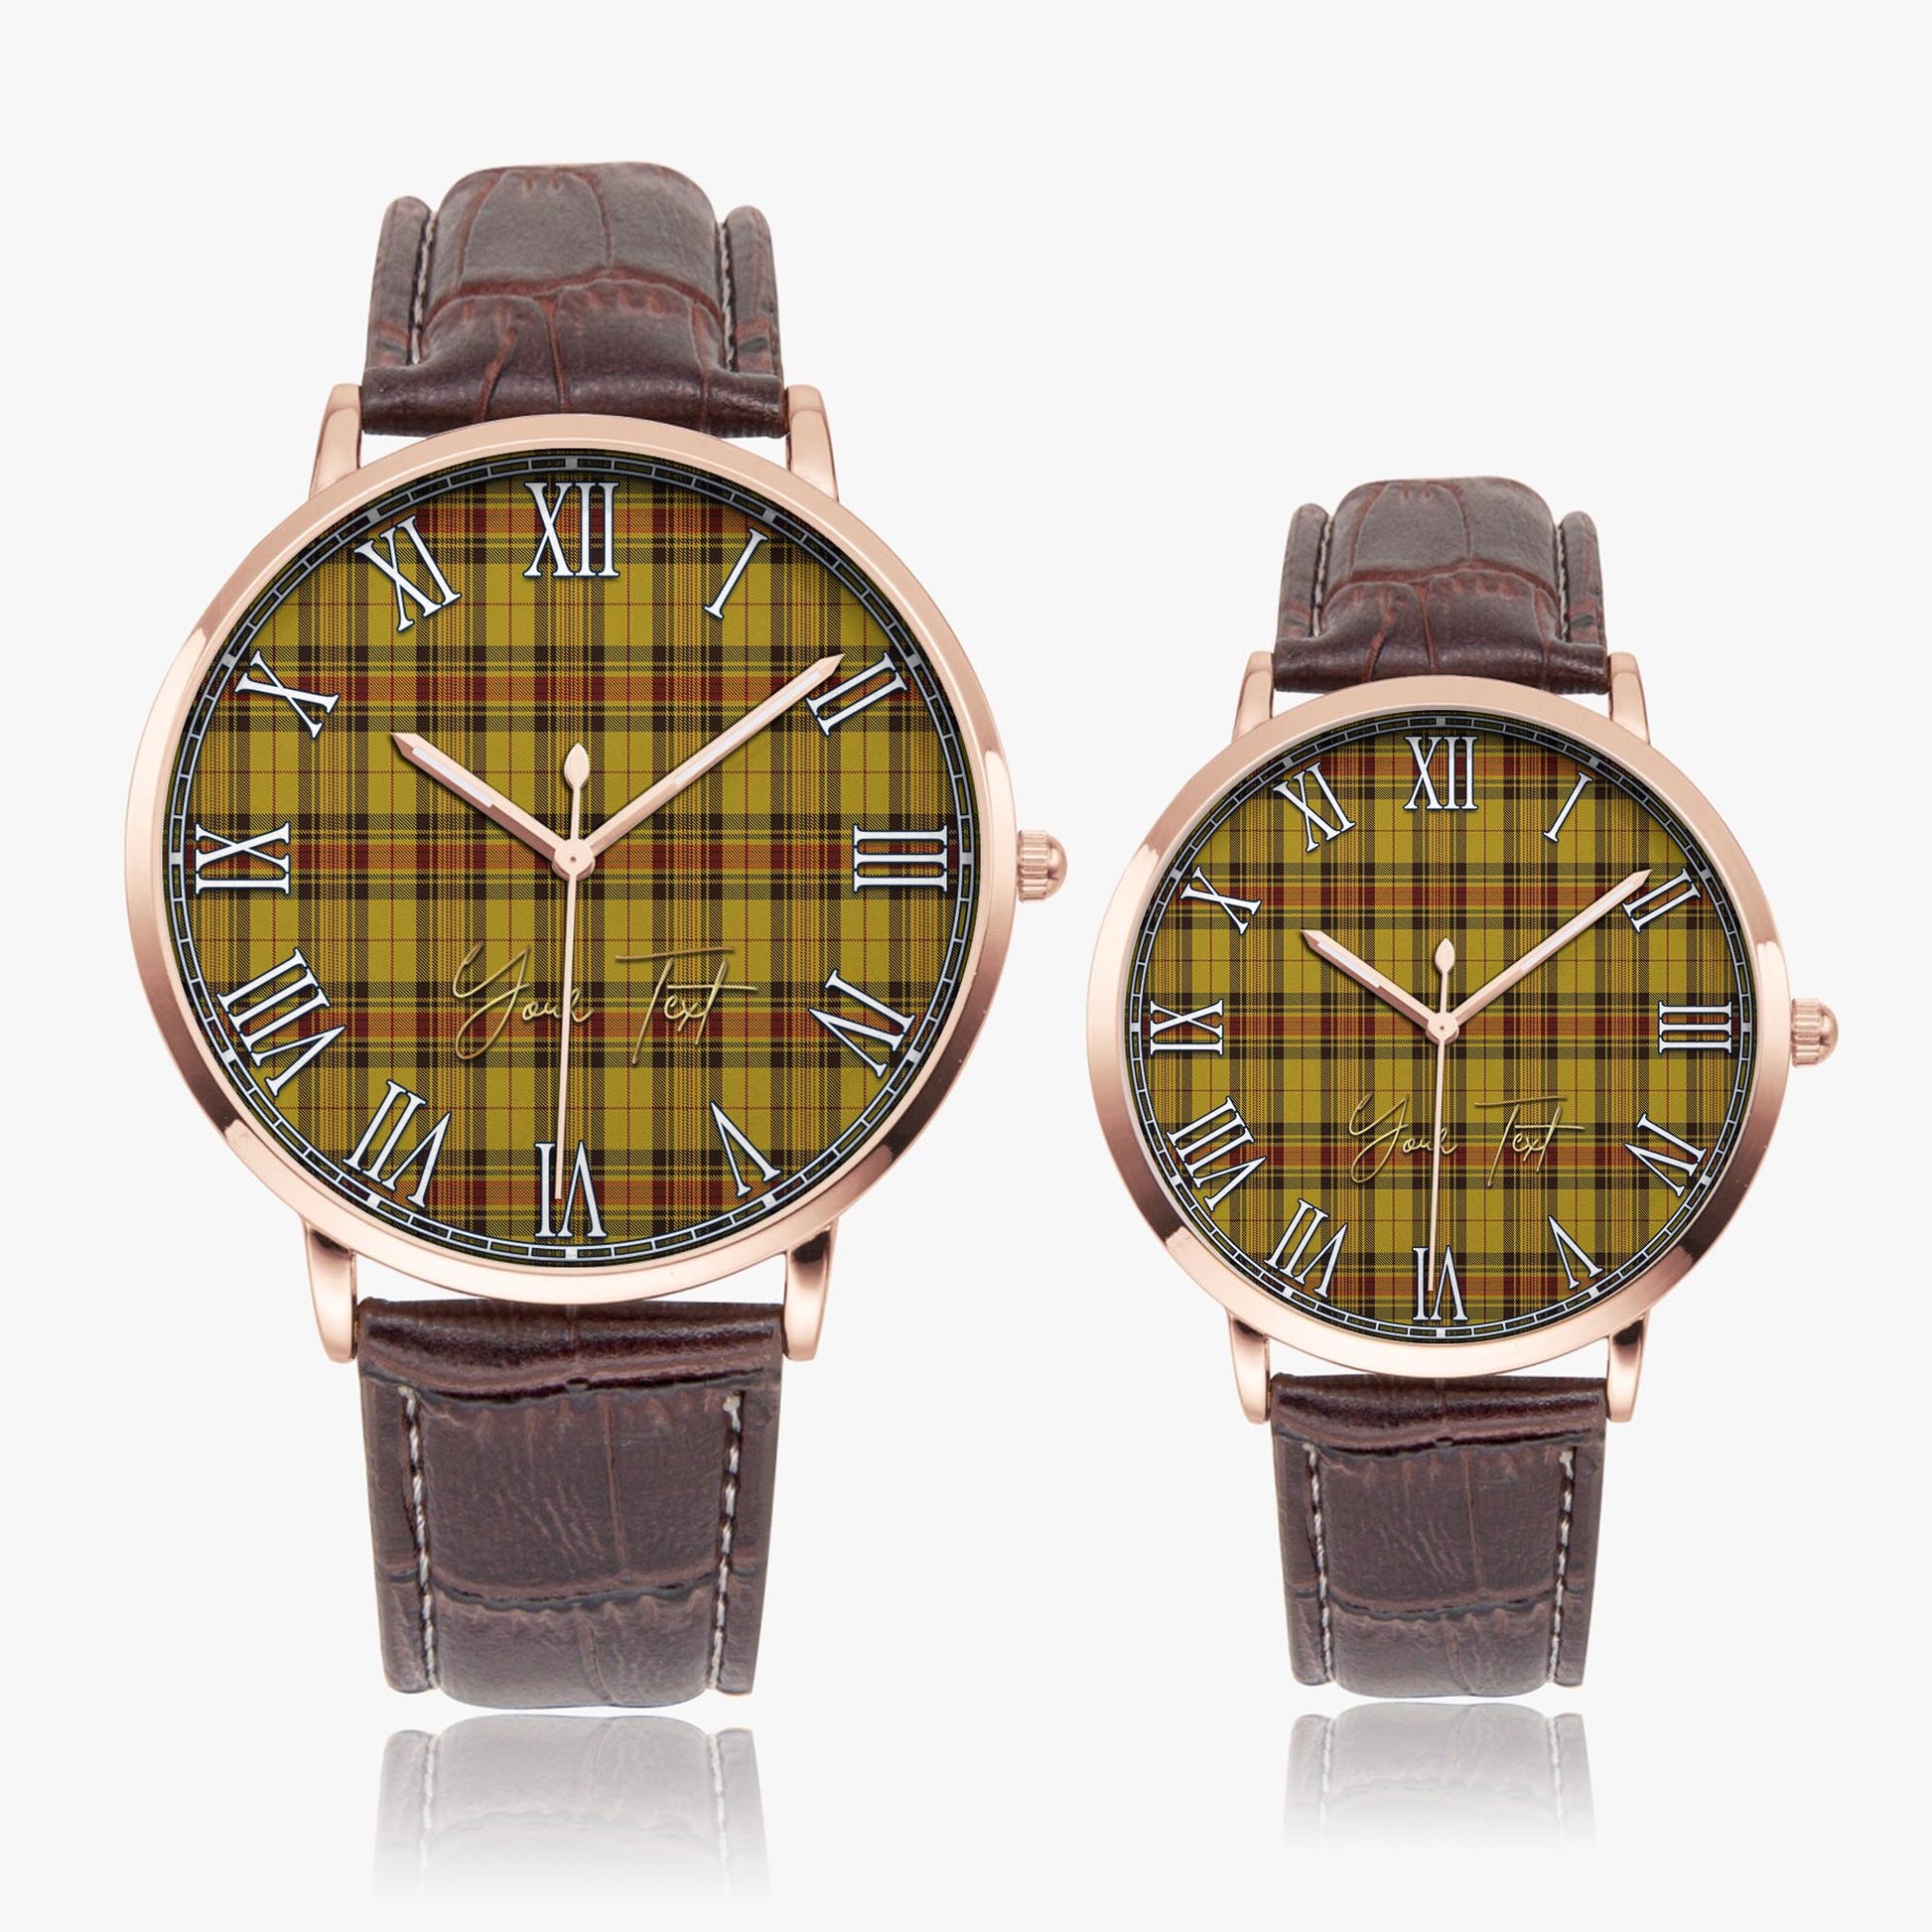 Morgan of Wales Tartan Personalized Your Text Leather Trap Quartz Watch Ultra Thin Rose Gold Case With Brown Leather Strap - Tartanvibesclothing